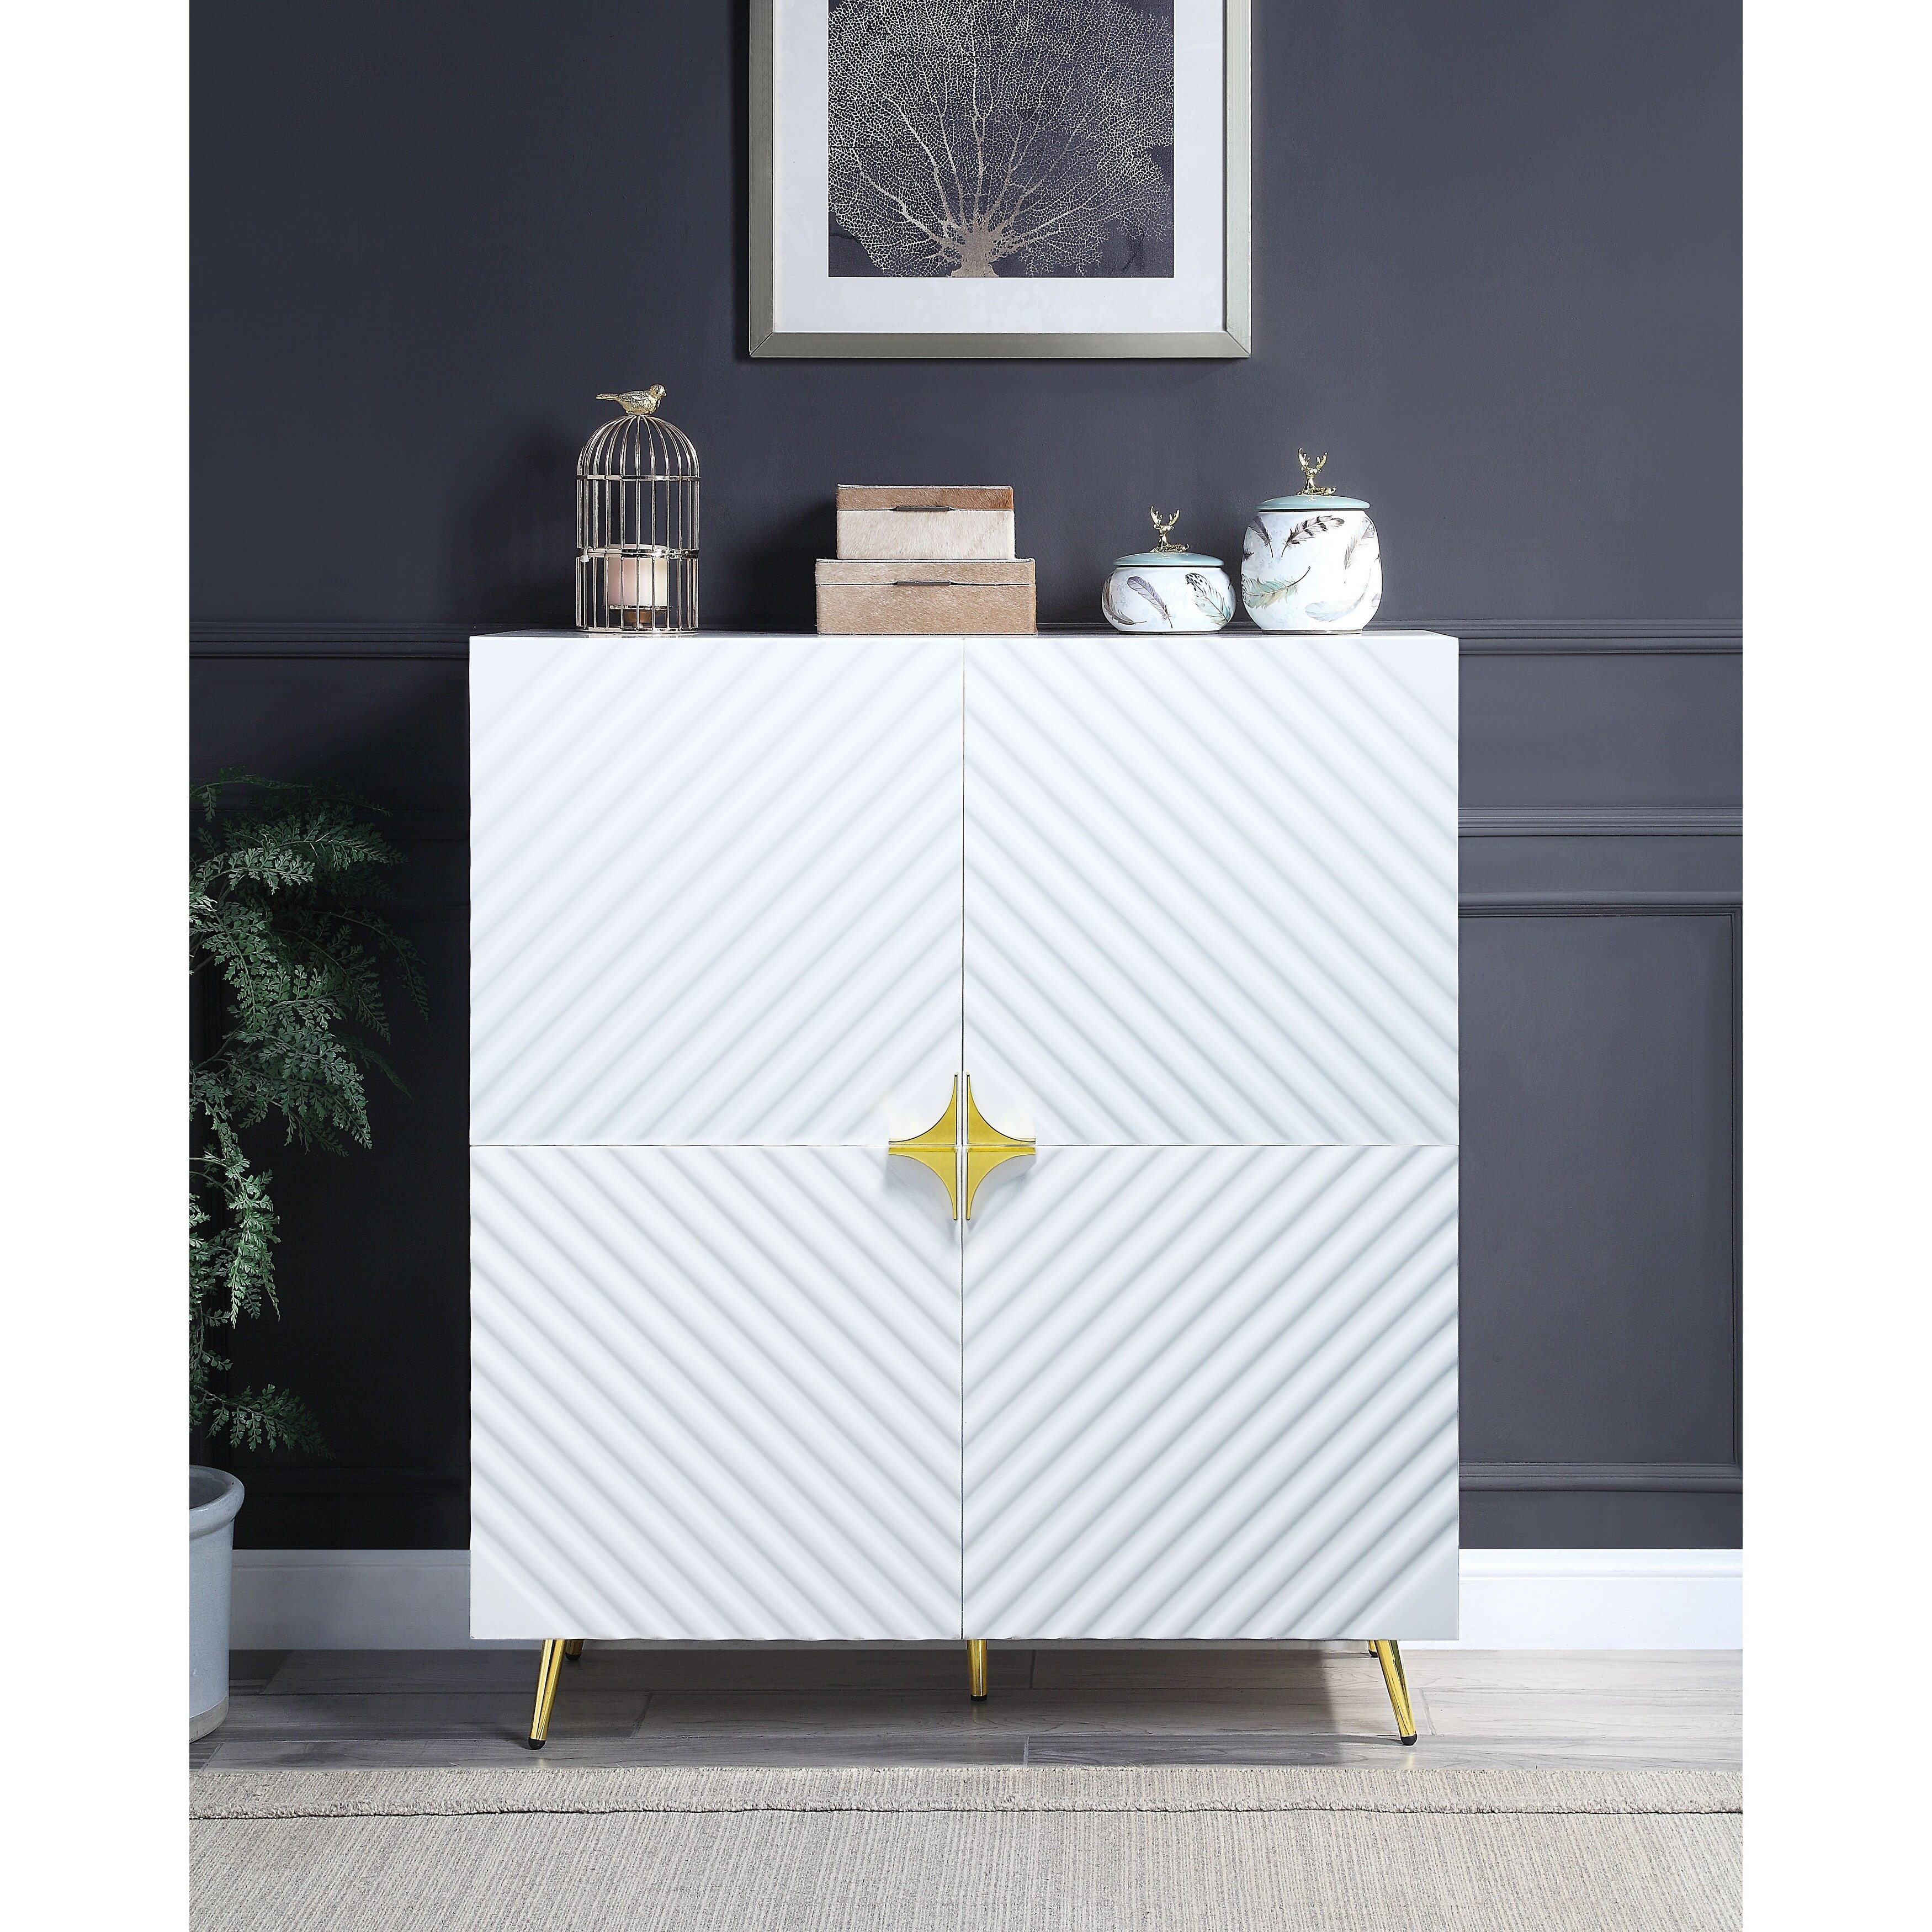 ACME Gaines Accent Cabinet in White High Gloss Finish